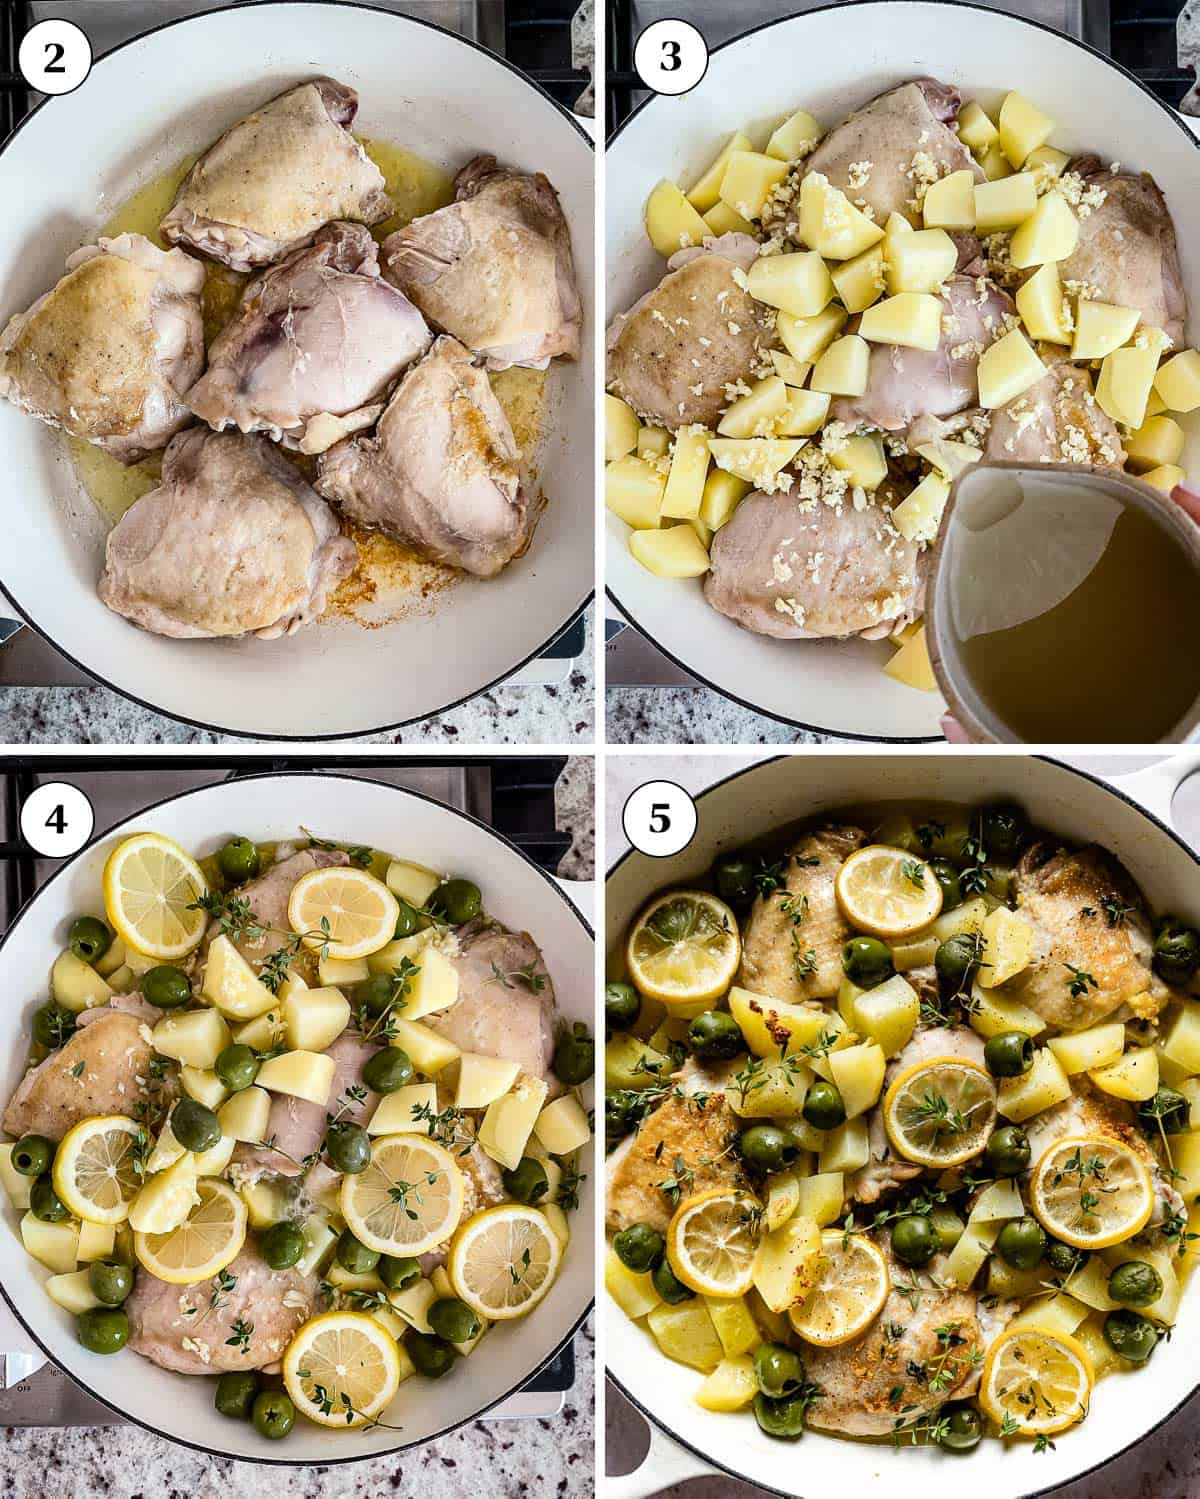 A collage of images showing how to make this healthy lemon chicken recipe.